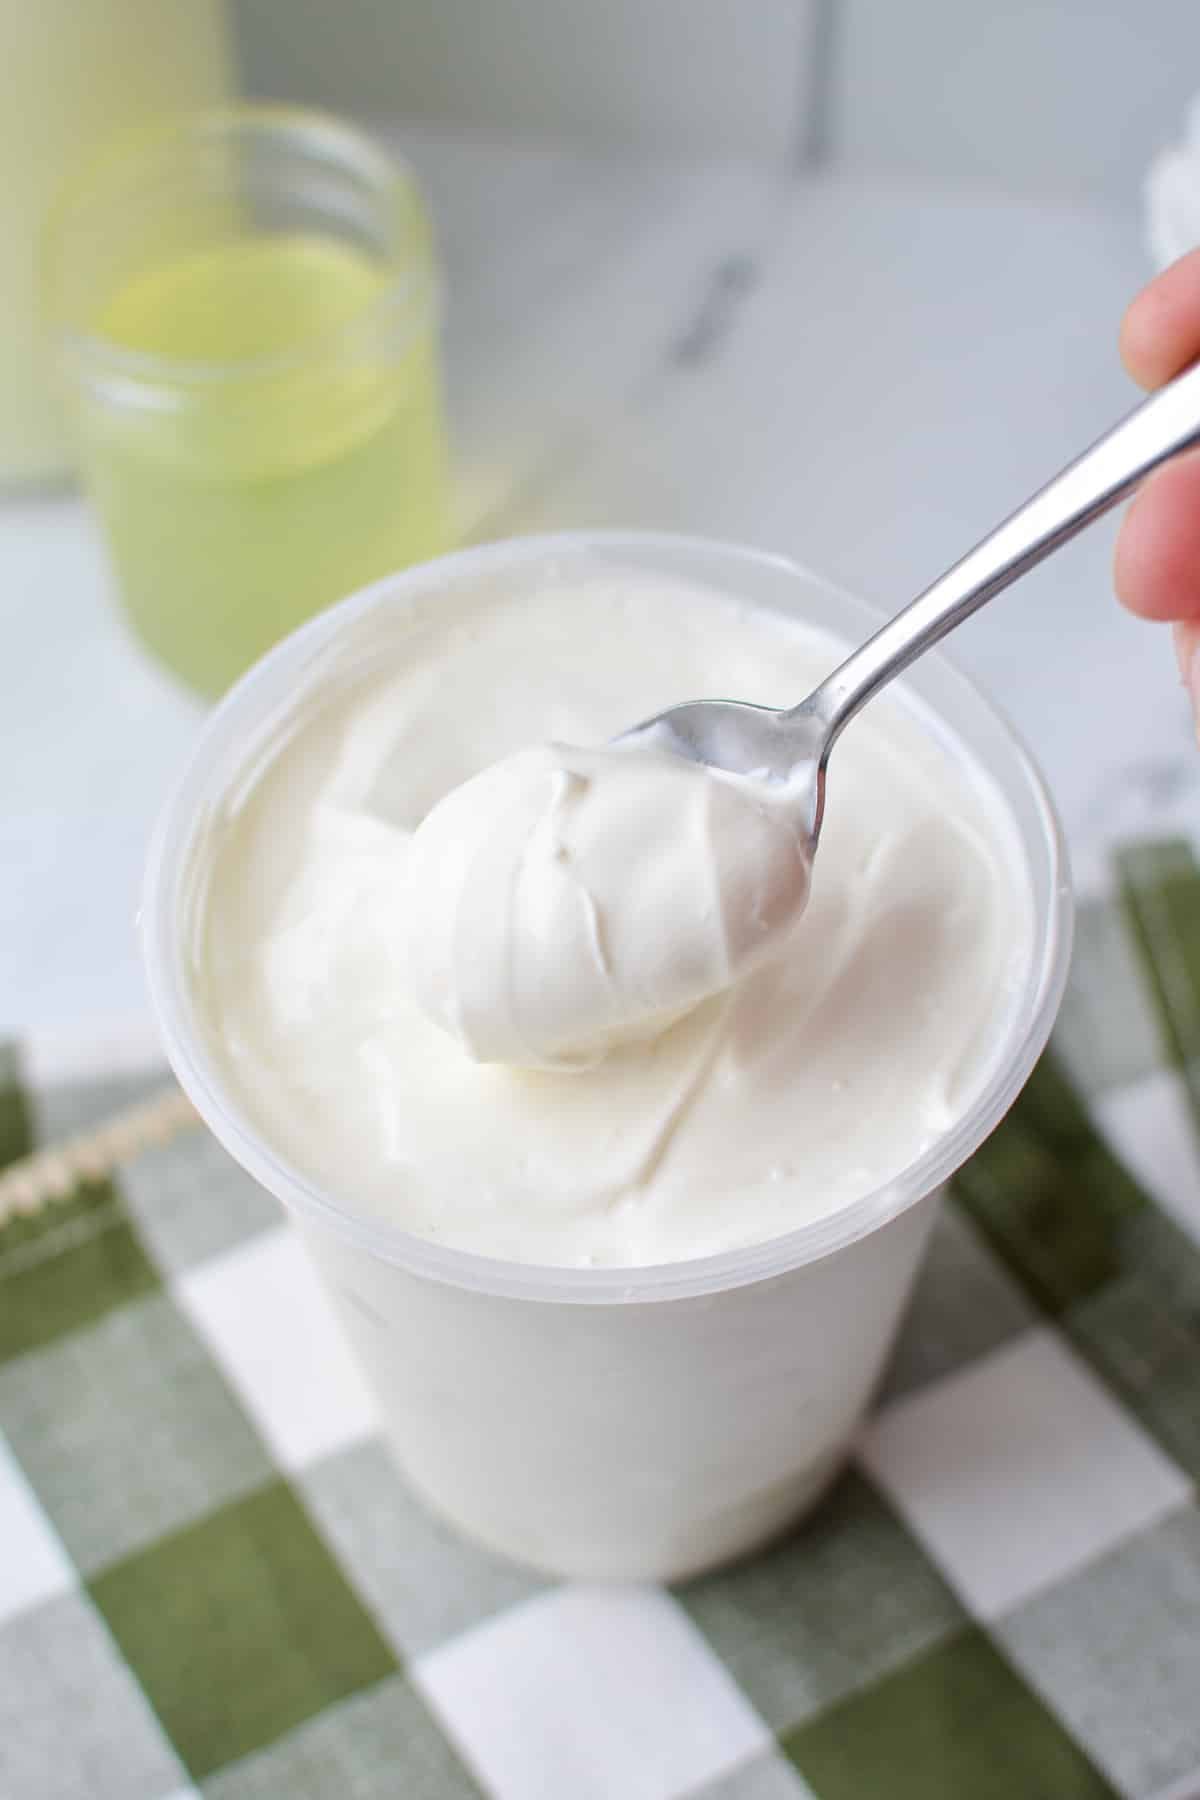 A container of yogurt with a spoon taking a portion.